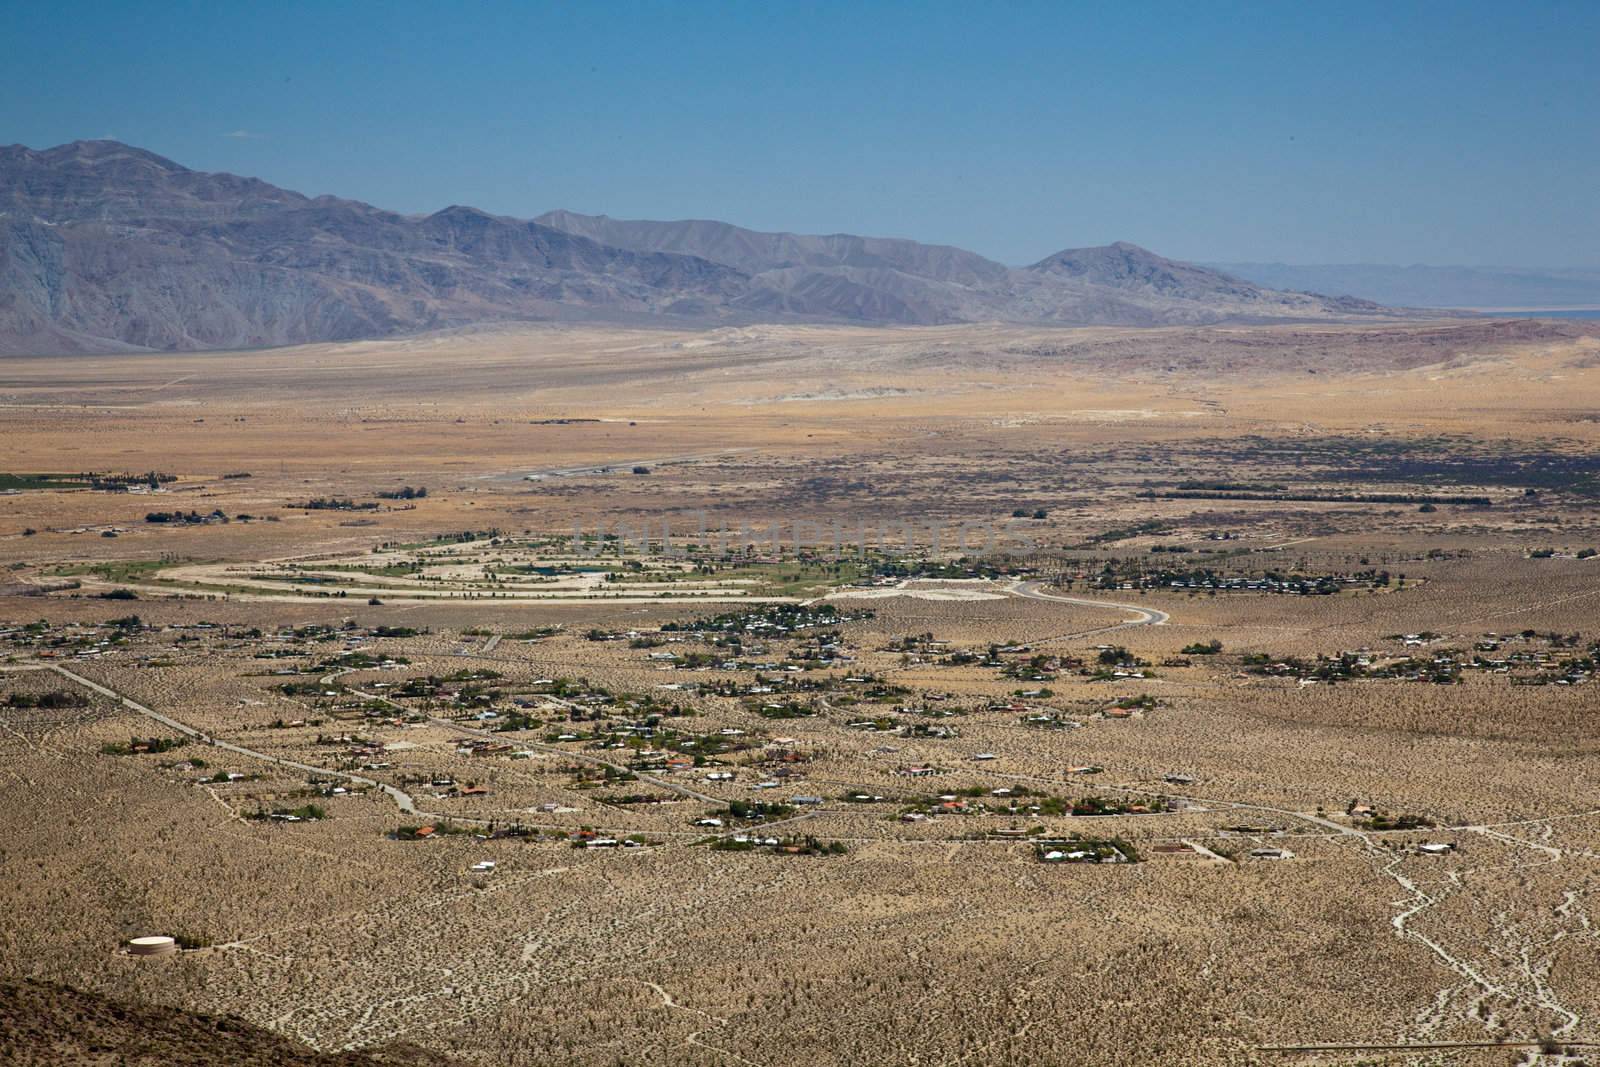 Anza Borrego desert and state park with the city of Borrego Springs in the valley